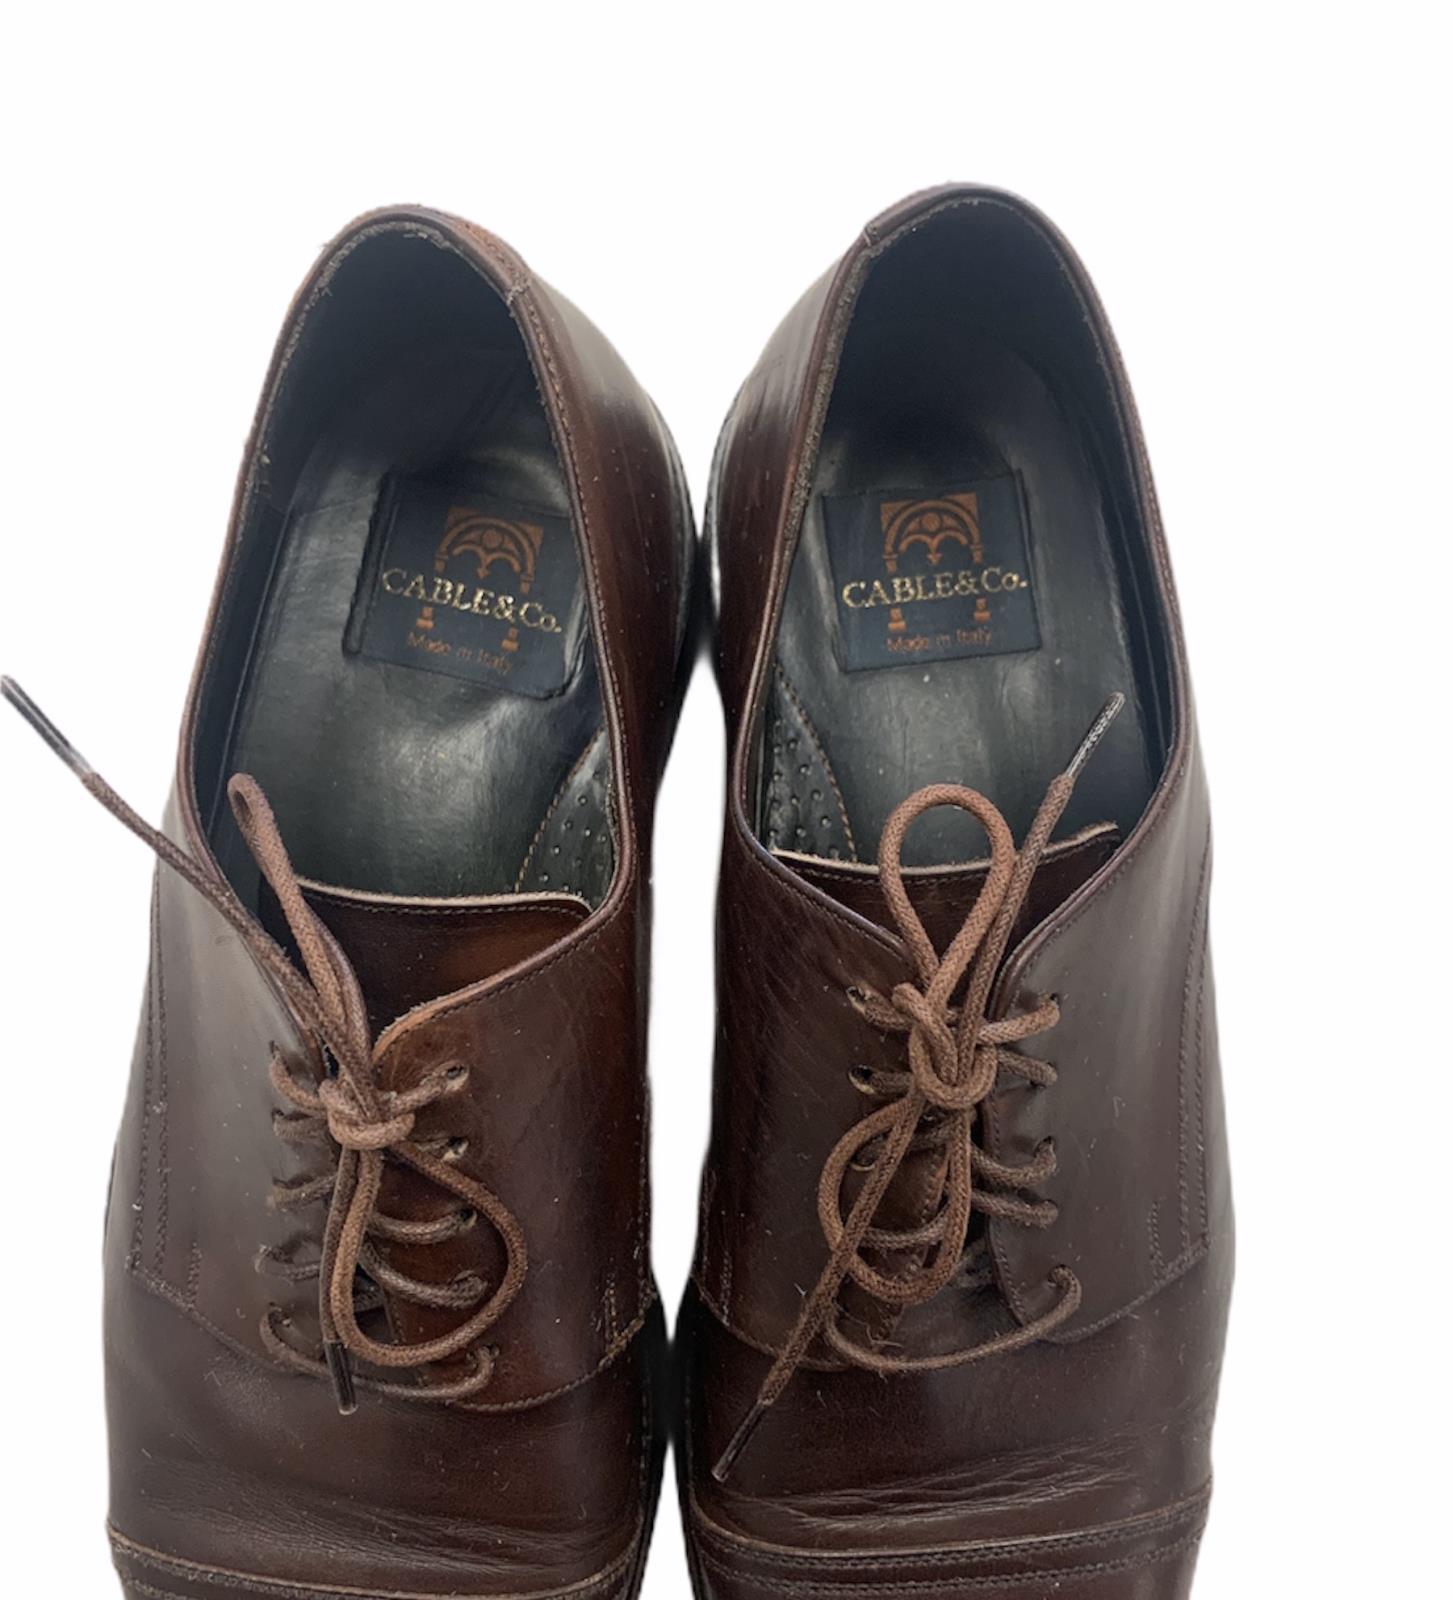 Cable & Co Oxfords Shoes Lace Up Leather Brown Size 10 D | eBay